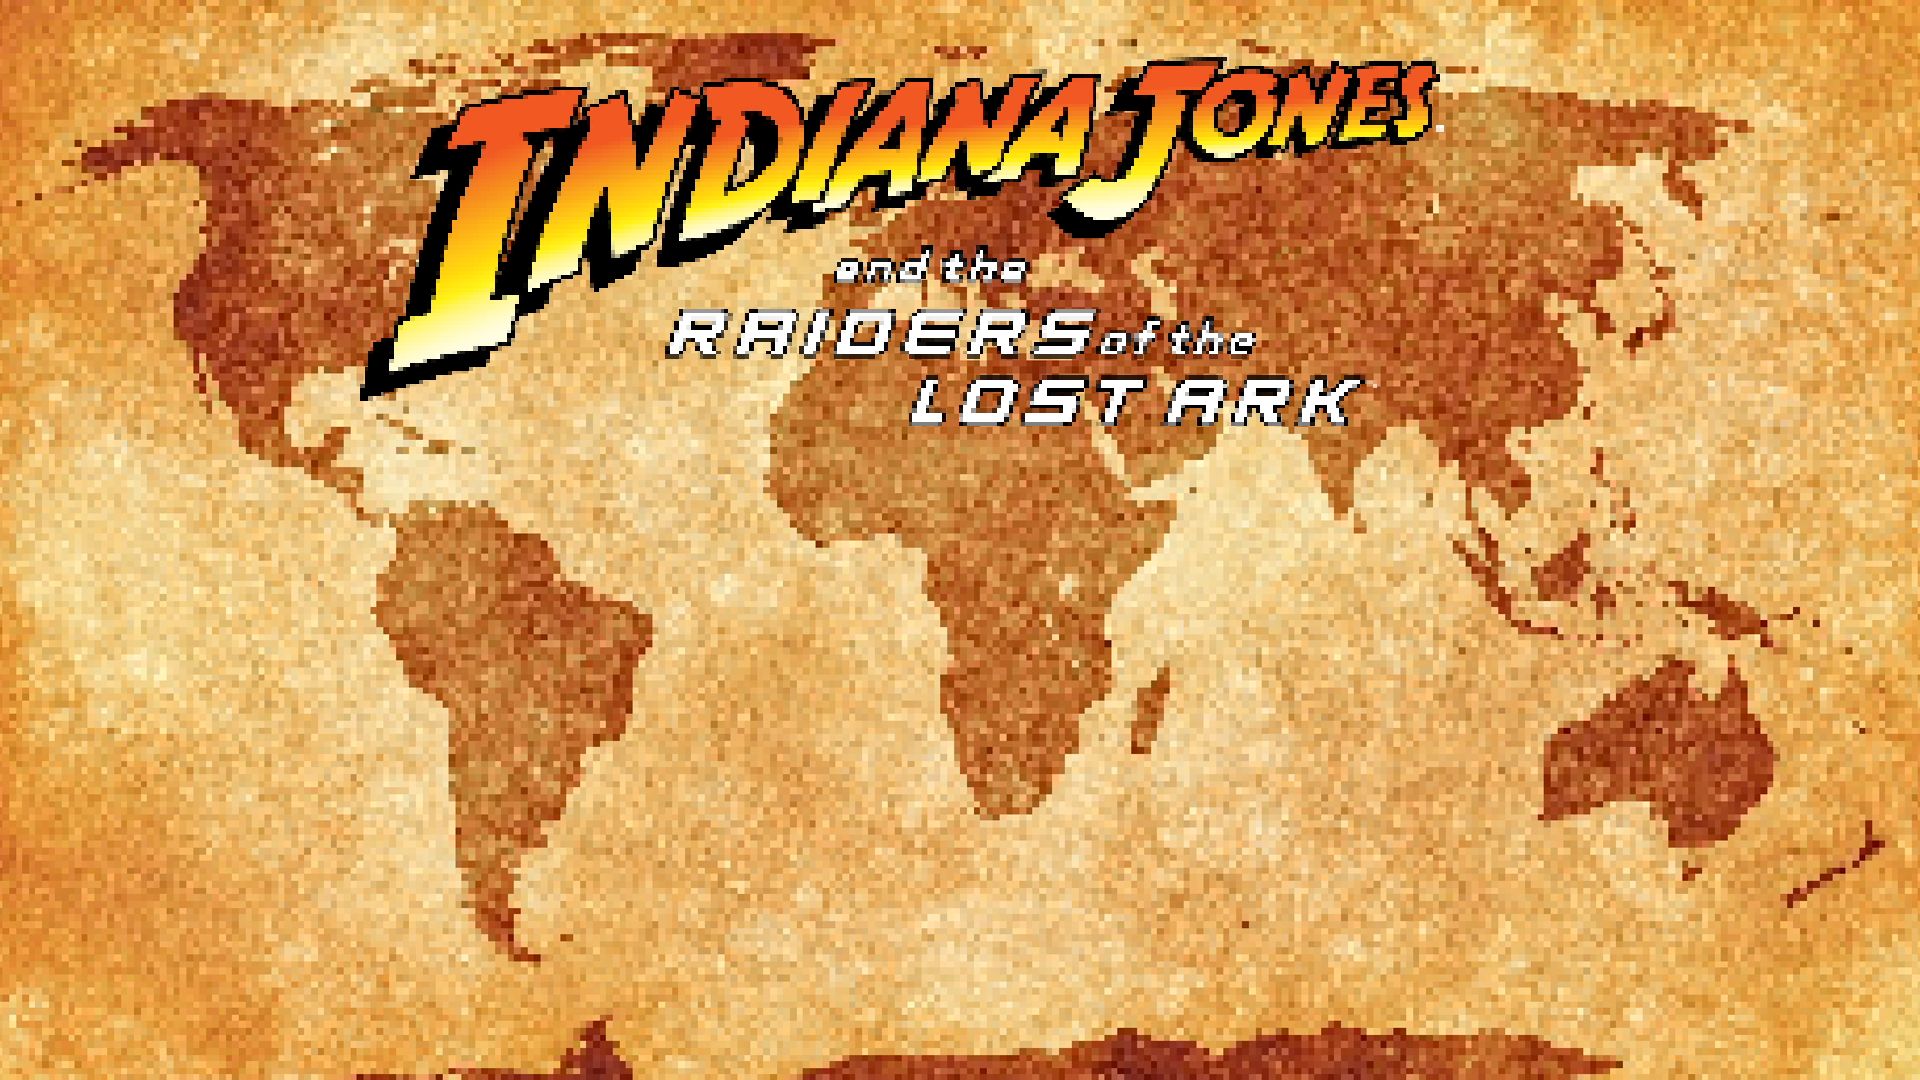 Indiana jones and the lost ark